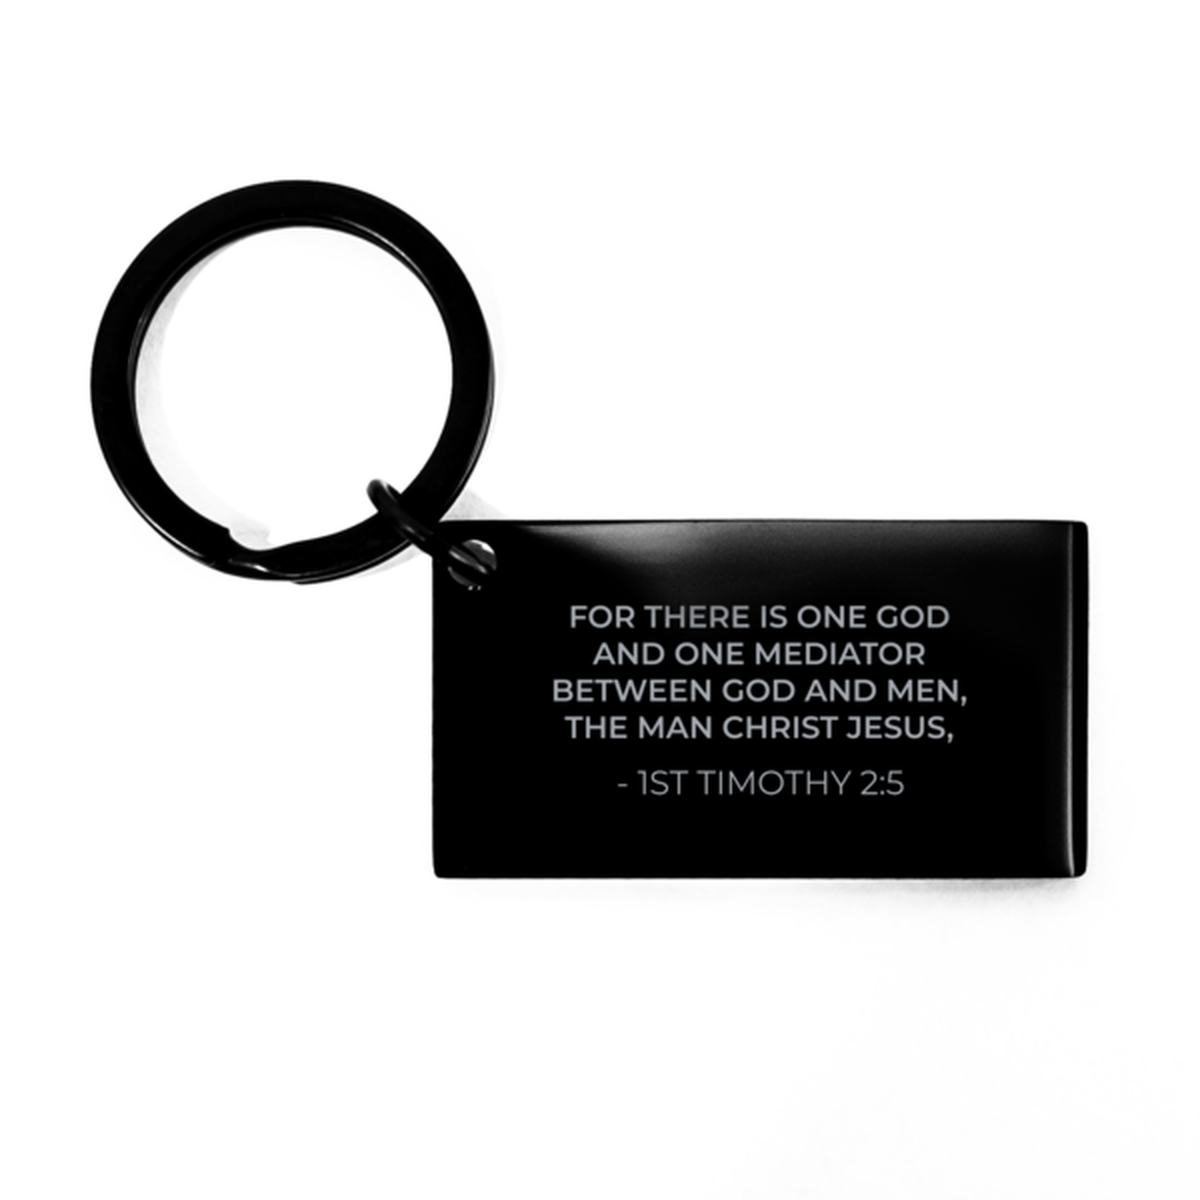 Bible Verse Black Keychain, 1St Timothy 2:5 For There Is One God And One Mediator, Christian Inspirational Key Ring Gifts For Men Women